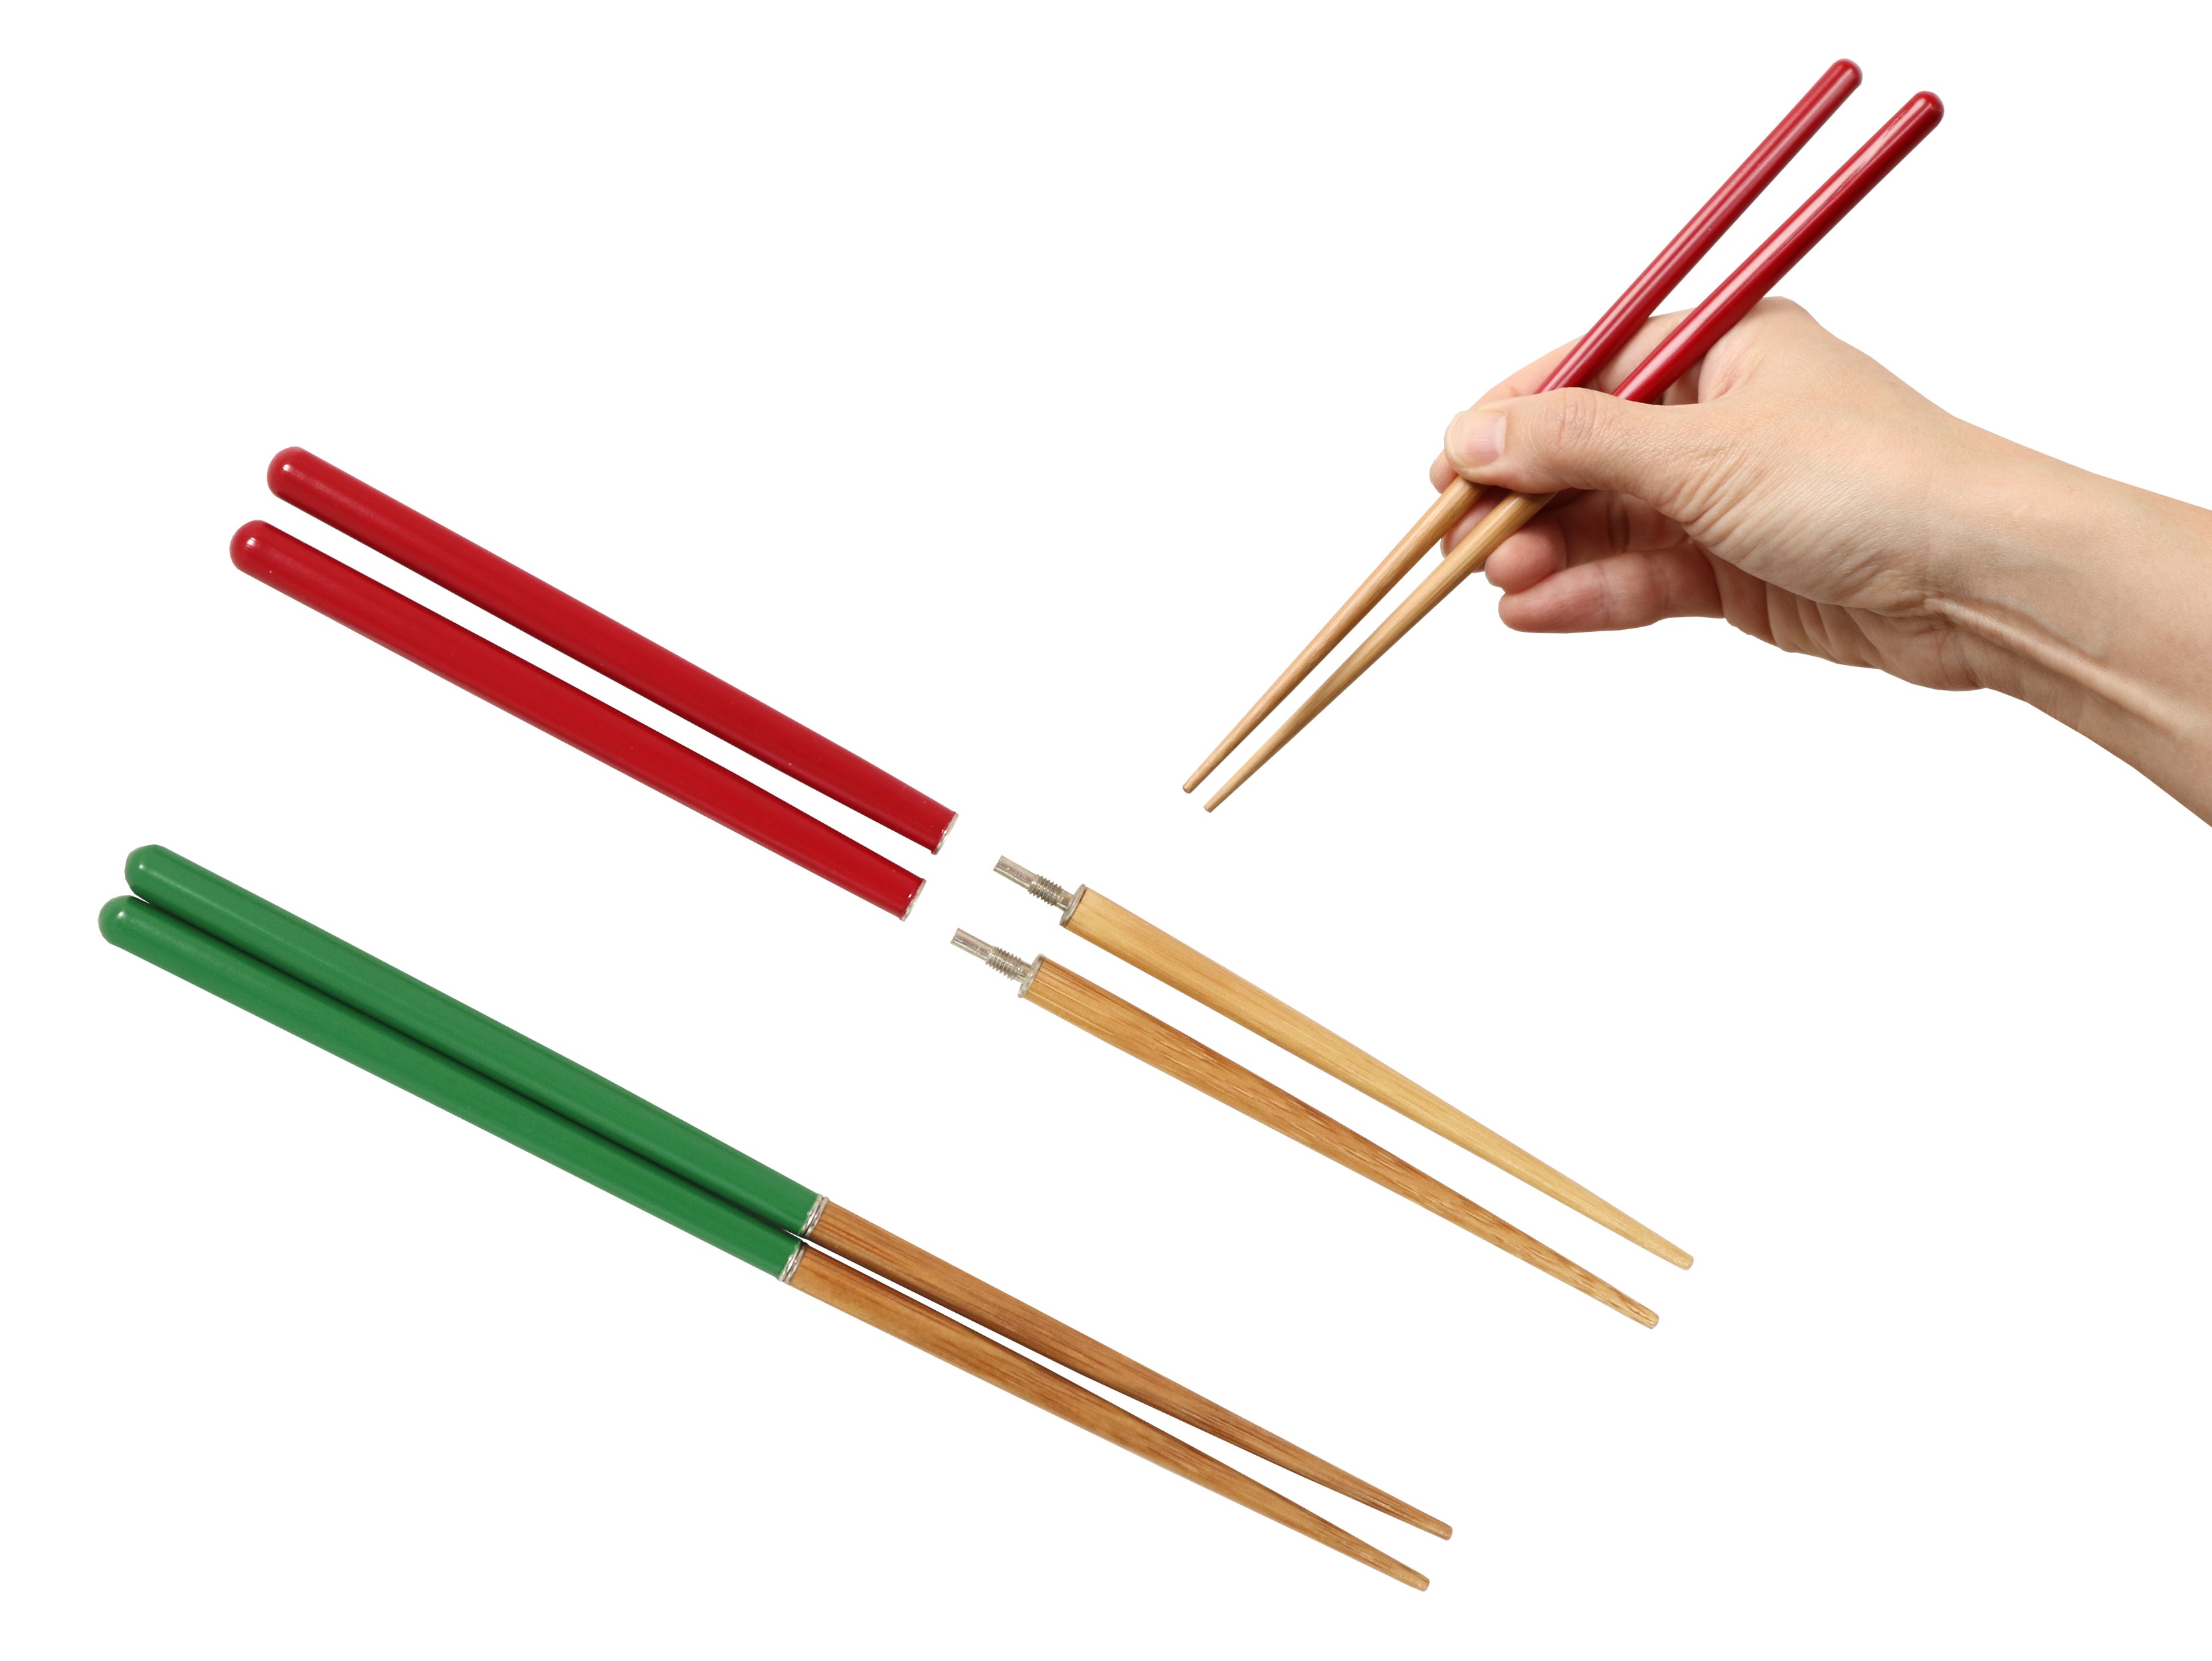 Collapsible Travel Chopsticks Review